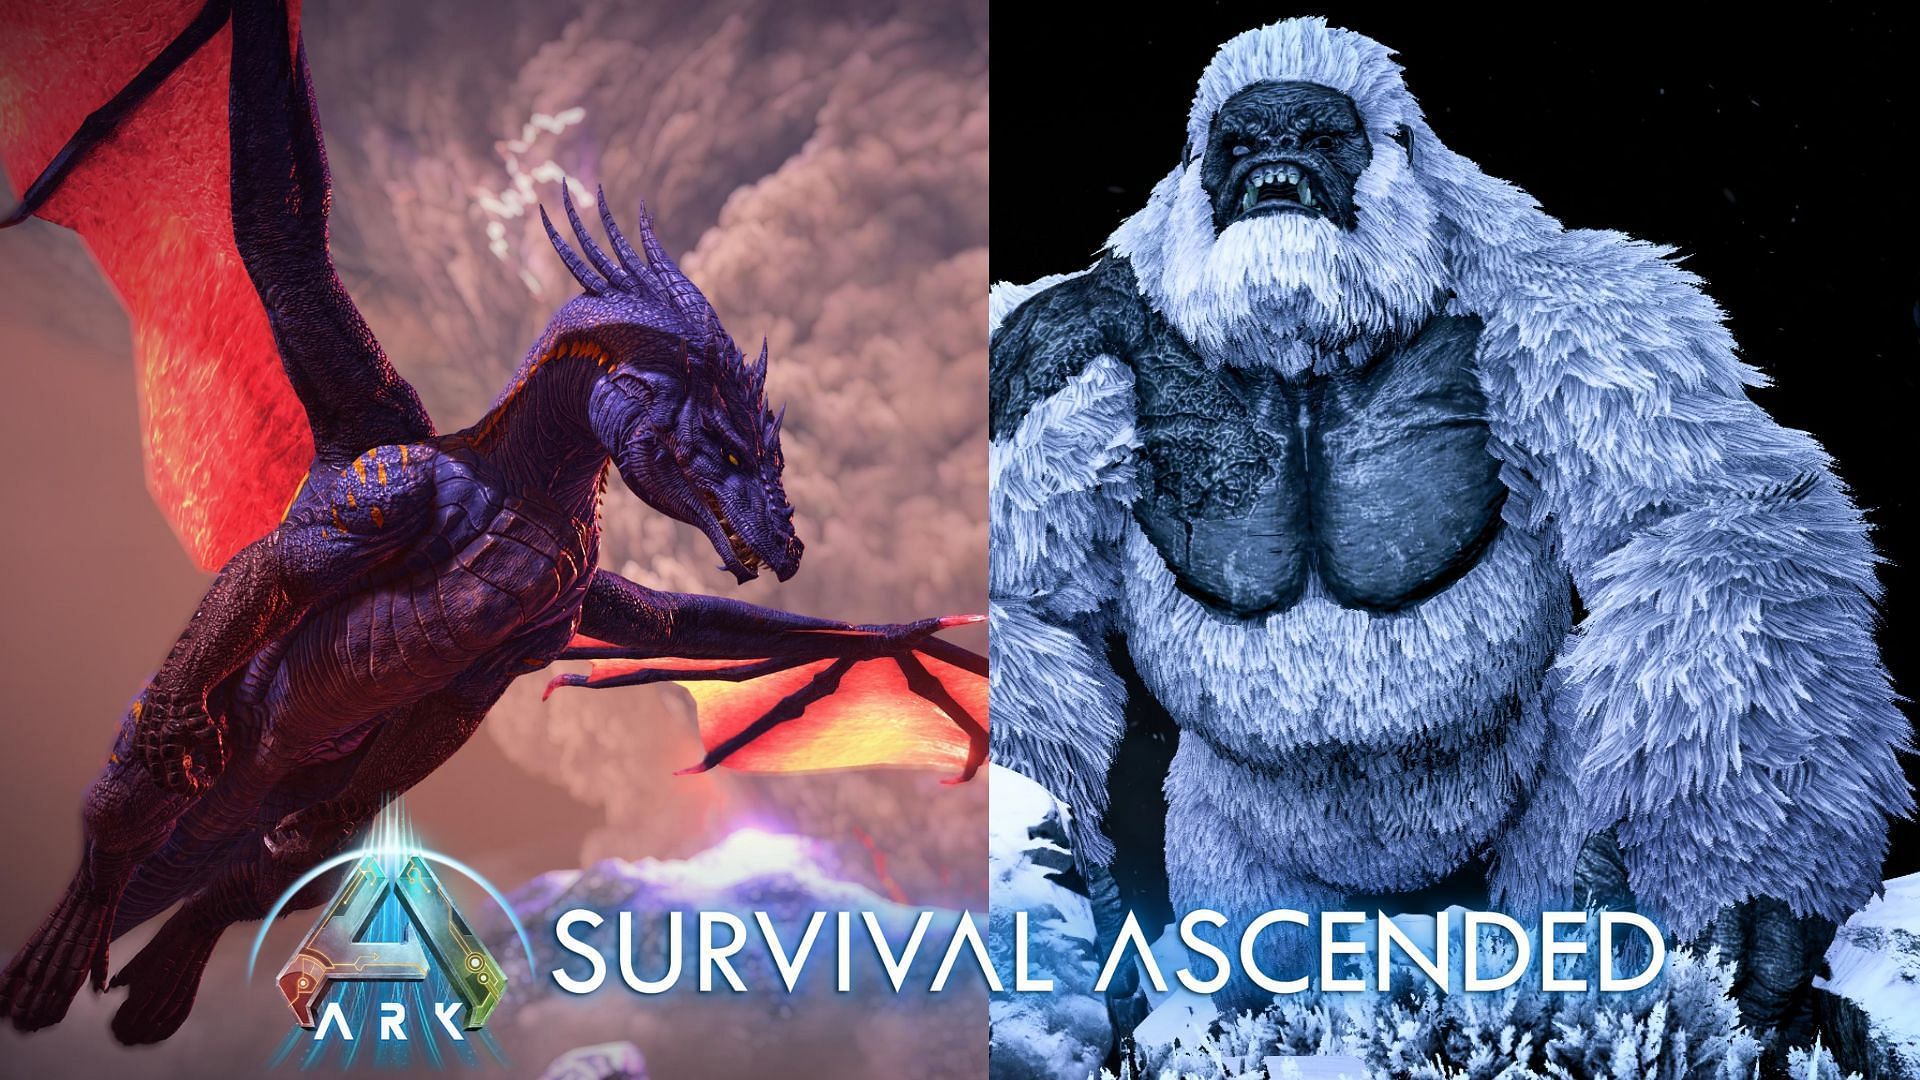 Booses in Ark Survival Ascended